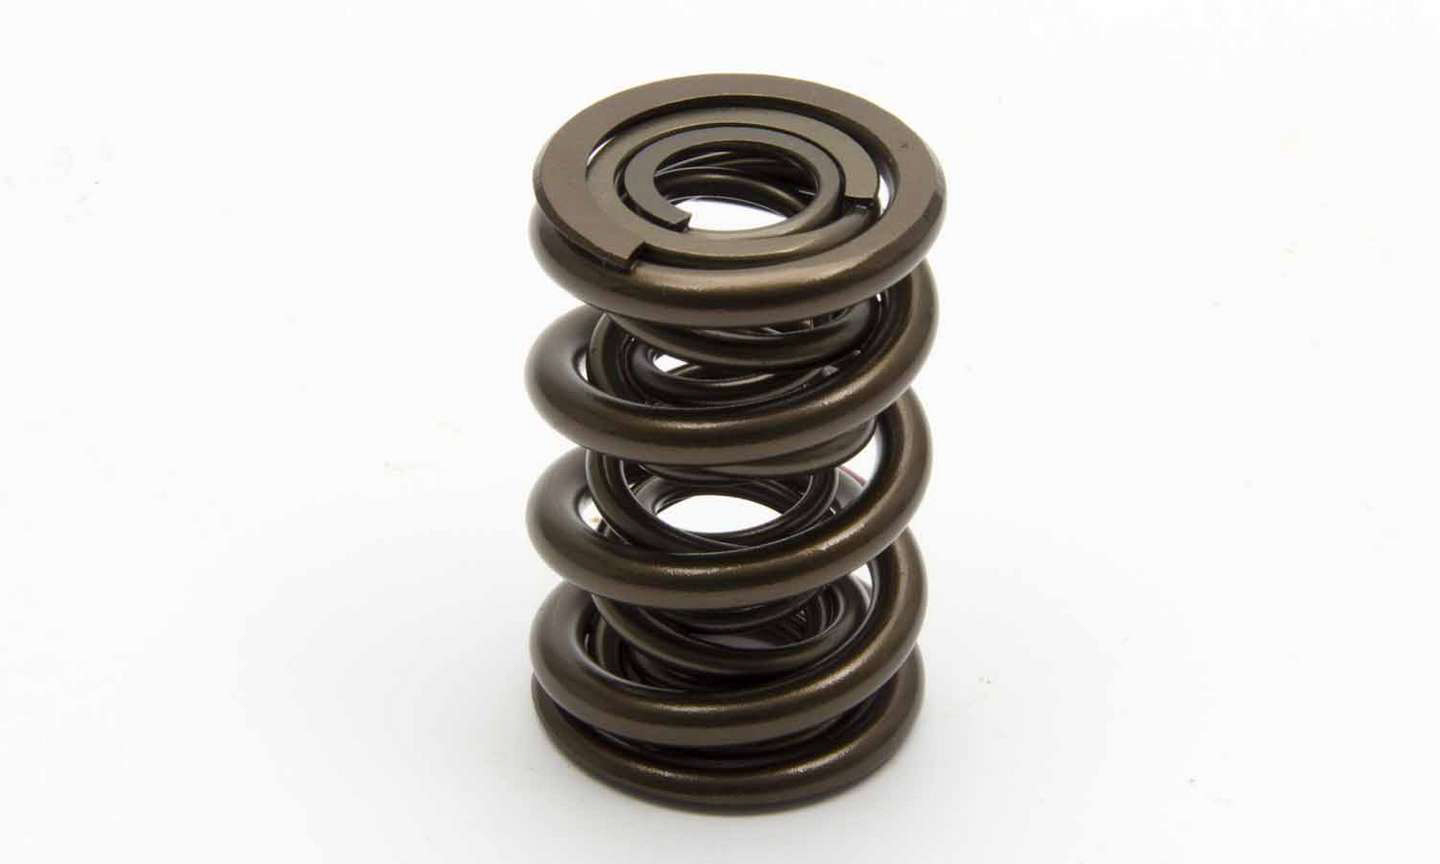 Shop for MANLEY PERFORMANCE PRODUCTS Valve Springs :: Racecar